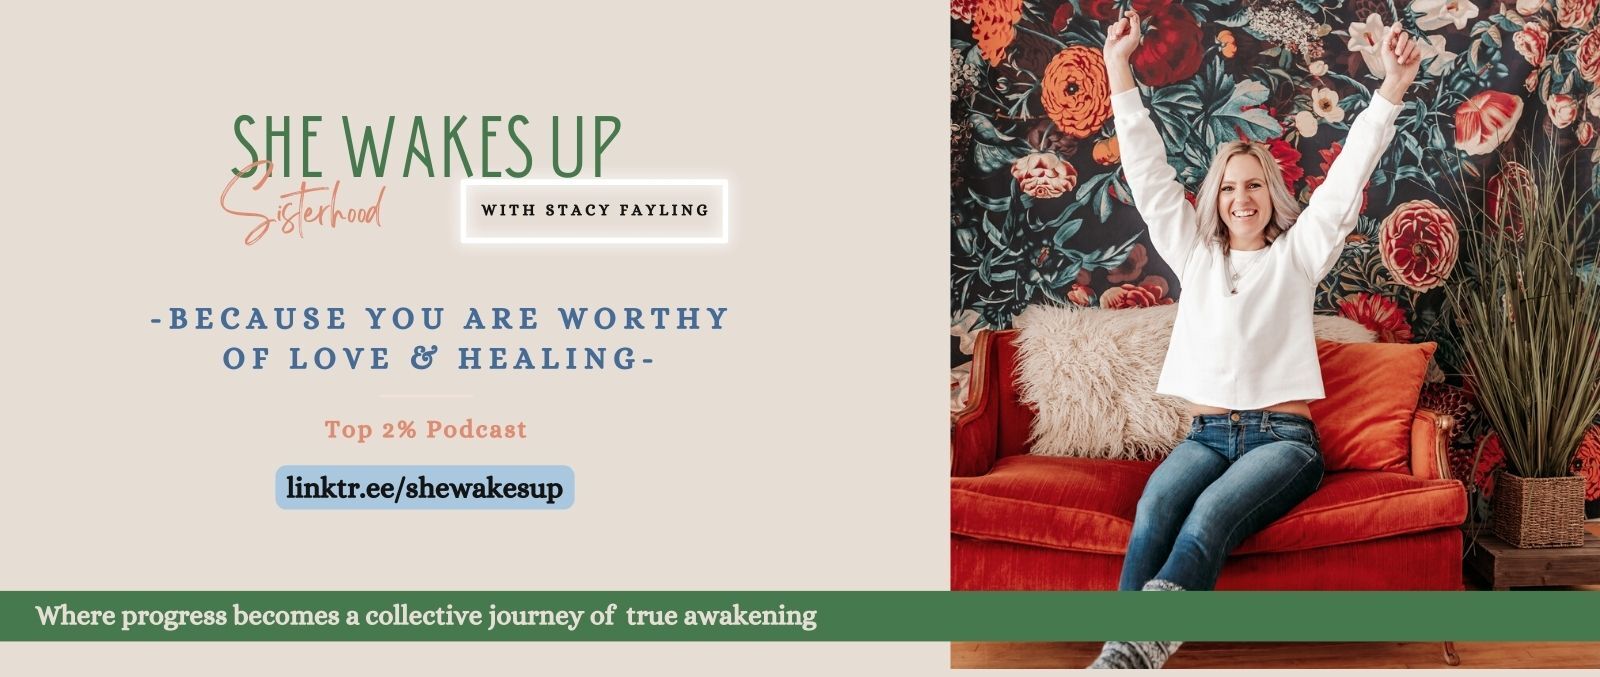 SHE WAKES UP- Because you are worthy of love & healing